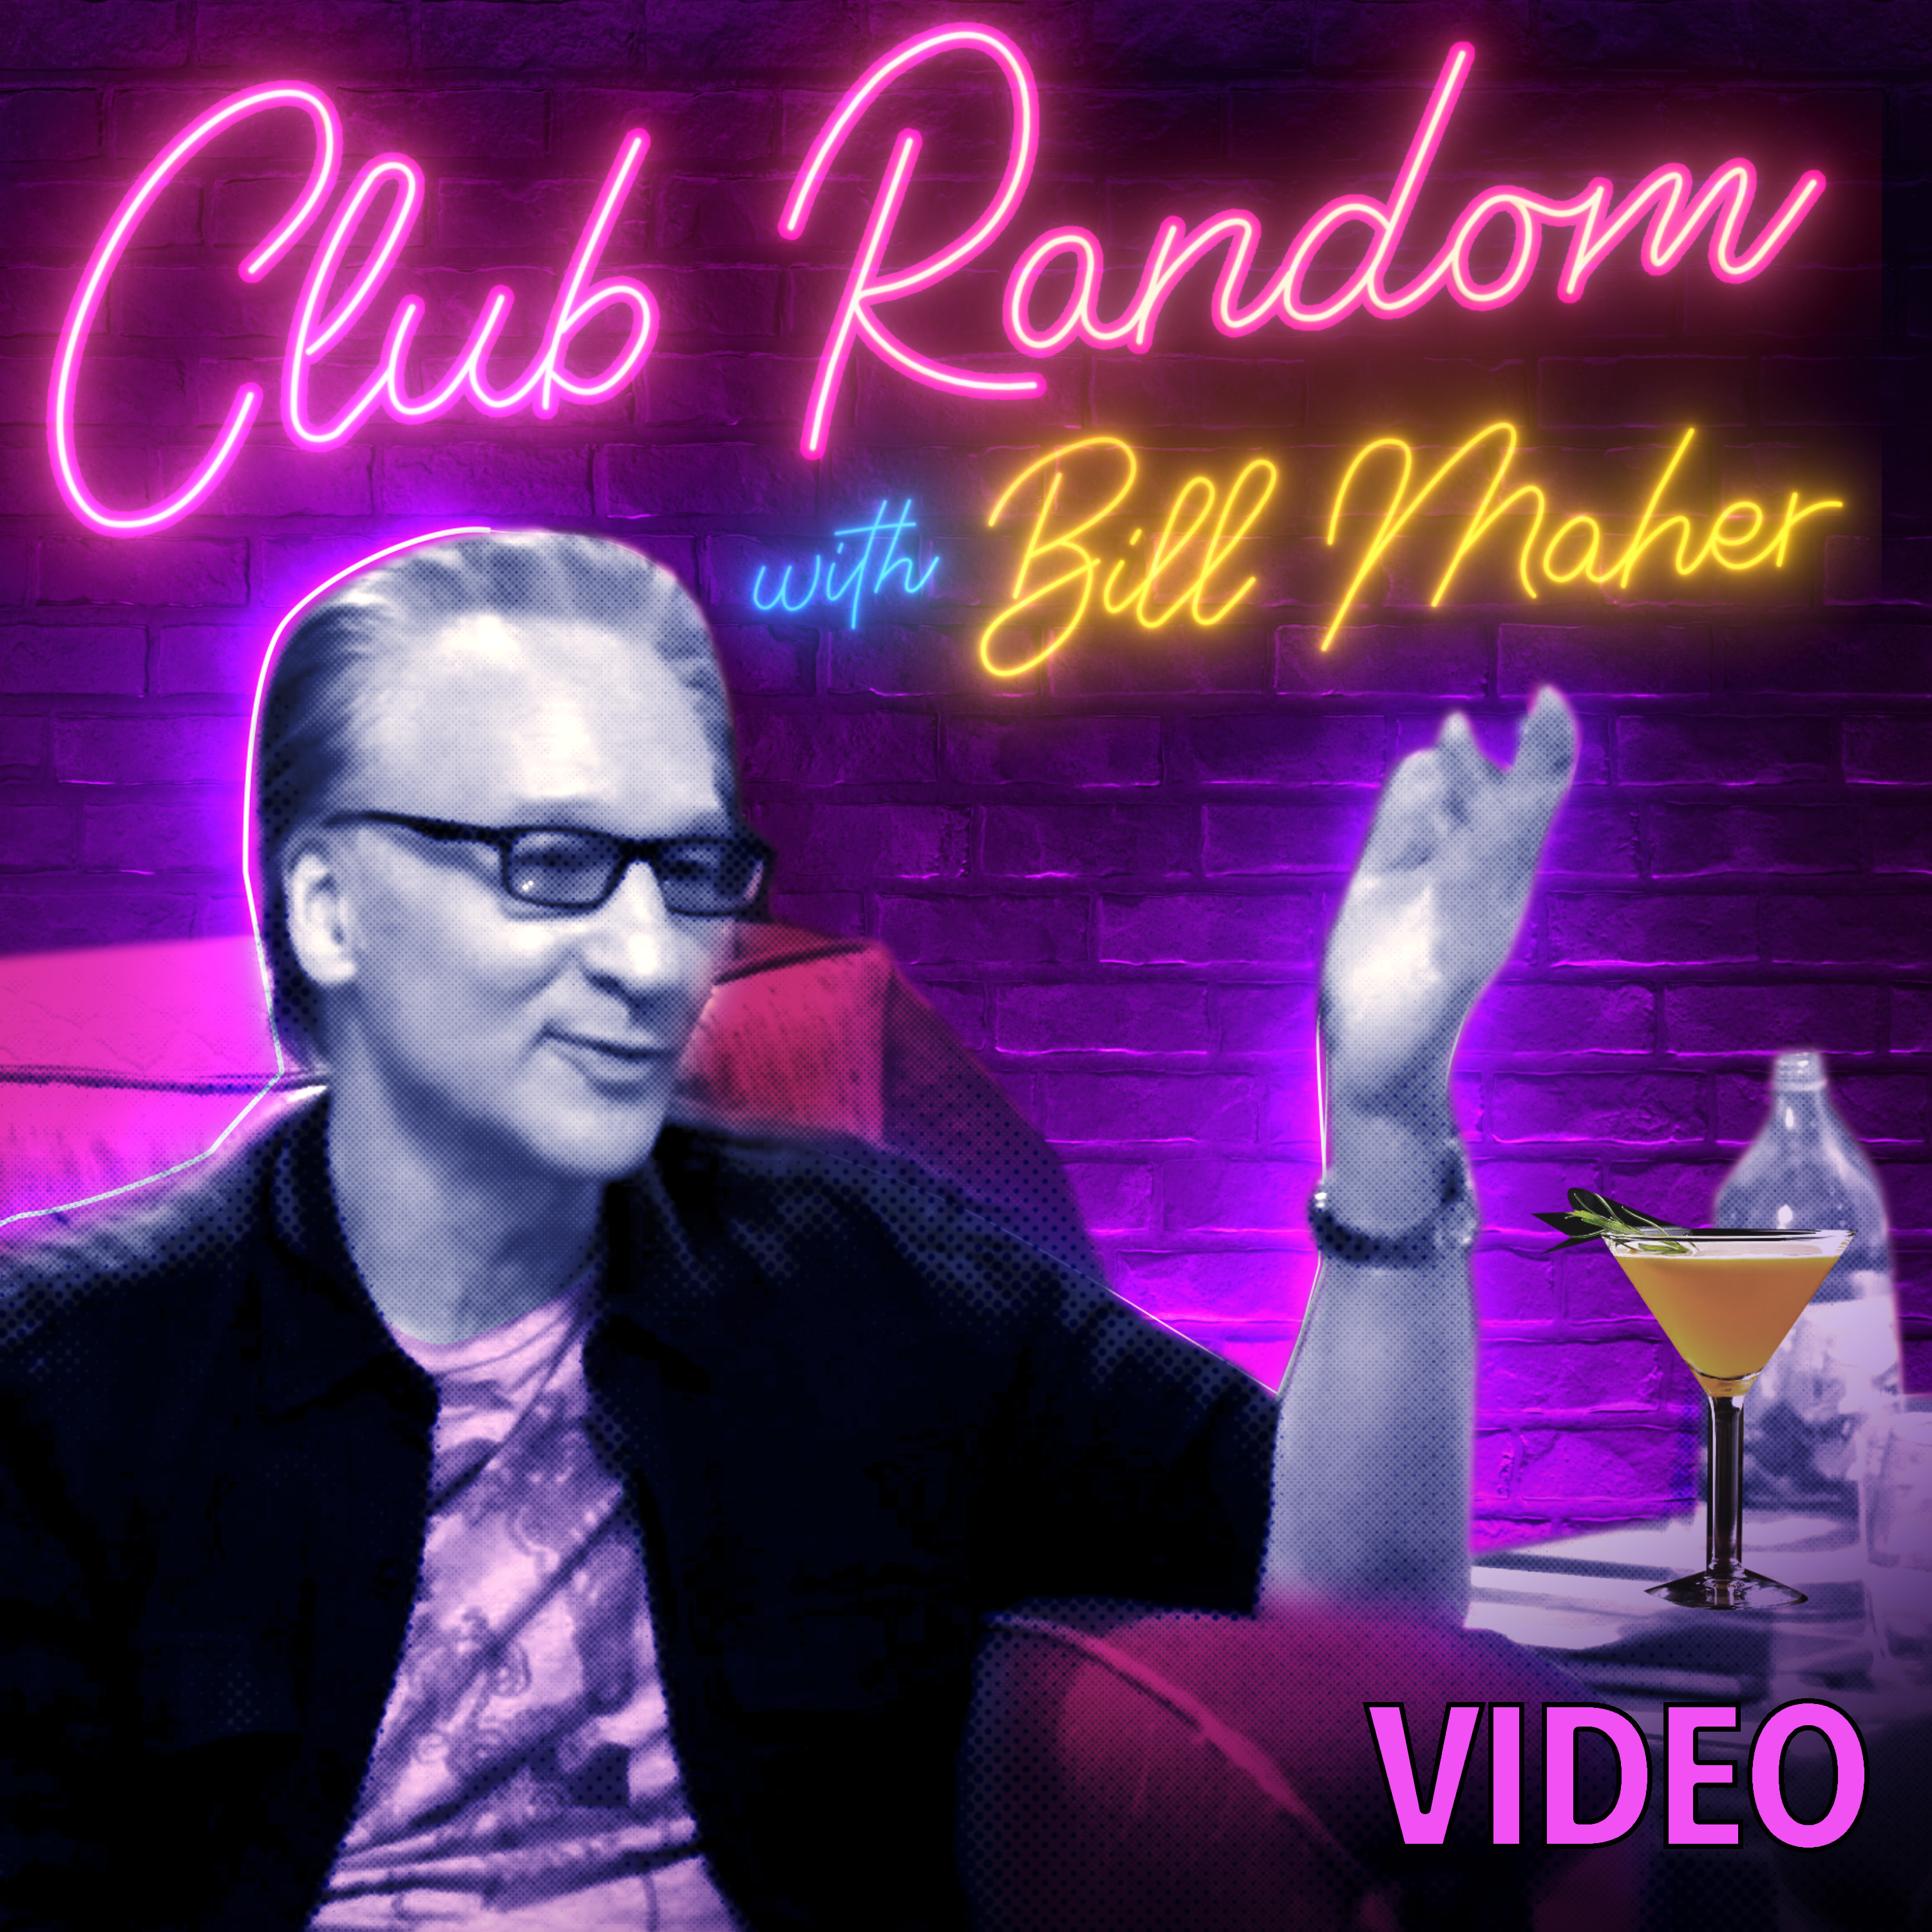 Video: Kathy Griffin | Club Random with Bill Maher